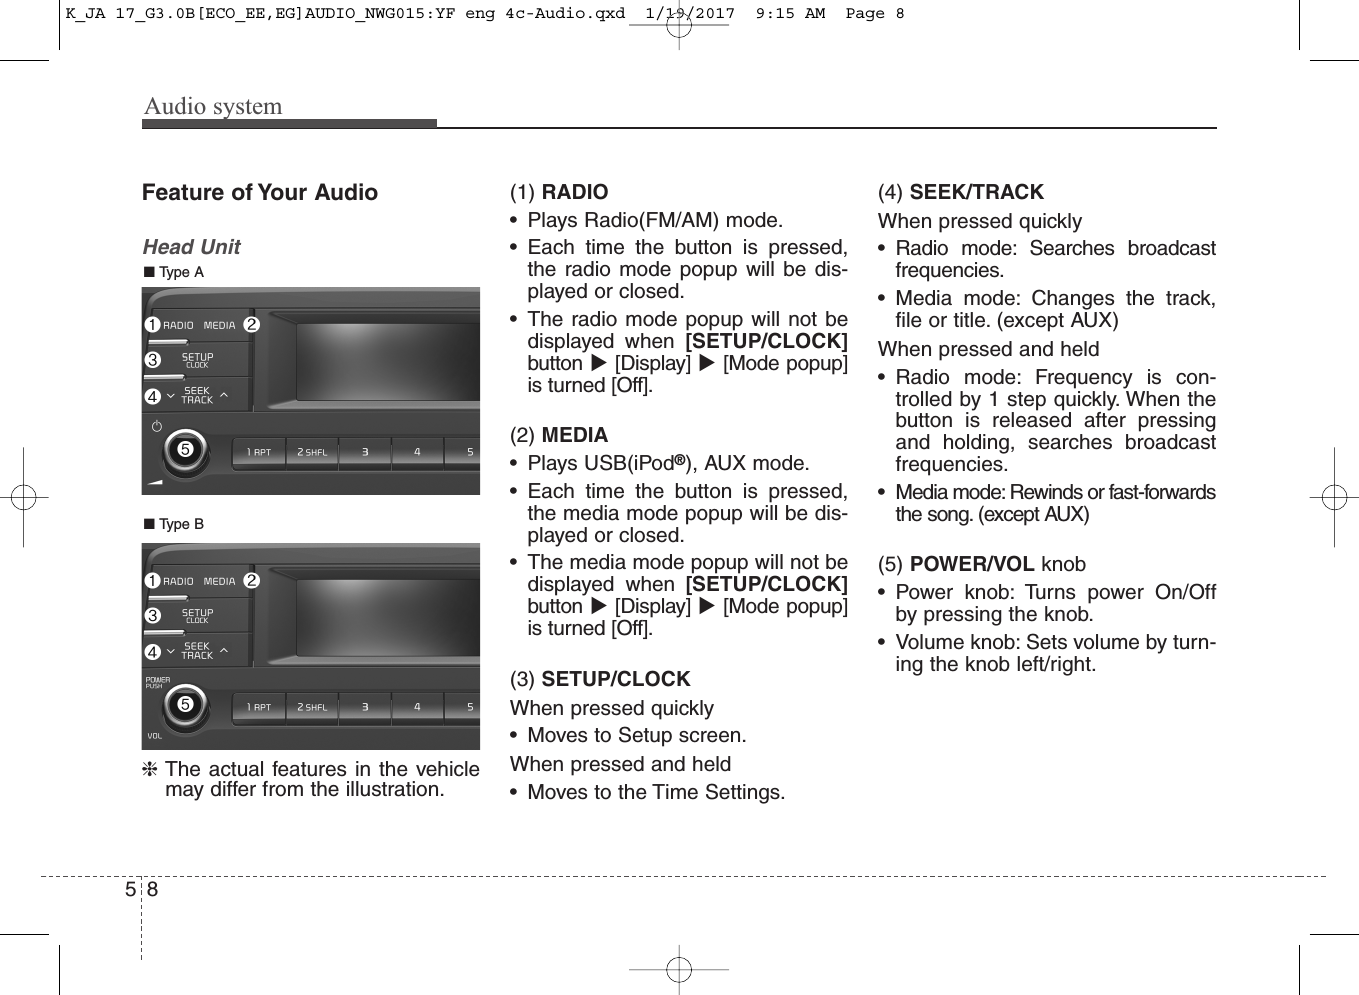 Audio system58Feature of Your AudioHead Unit❈The actual features in the vehiclemay differ from the illustration.(1) RADIO• Plays Radio(FM/AM) mode.• Each time the button is pressed,the radio mode popup will be dis-played or closed.• The radio mode popup will not bedisplayed when [SETUP/CLOCK]button [Display] [Mode popup]is turned [Off].(2) MEDIA• Plays USB(iPod®), AUX mode.• Each time the button is pressed,the media mode popup will be dis-played or closed. • The media mode popup will not bedisplayed when [SETUP/CLOCK]button [Display] [Mode popup]is turned [Off].(3) SETUP/CLOCKWhen pressed quickly• Moves to Setup screen.When pressed and held• Moves to the Time Settings.(4) SEEK/TRACKWhen pressed quickly• Radio mode: Searches broadcastfrequencies.• Media mode: Changes the track,file or title. (except AUX)When pressed and held• Radio mode: Frequency is con-trolled by 1 step quickly. When thebutton is released after pressingand holding, searches broadcastfrequencies.• Media mode: Rewinds or fast-forwardsthe song. (except AUX)(5) POWER/VOL knob• Power knob: Turns power On/Offby pressing the knob.• Volume knob: Sets volume by turn-ing the knob left/right.■ Type B■ Type AK_JA 17_G3.0B[ECO_EE,EG]AUDIO_NWG015:YF eng 4c-Audio.qxd  1/19/2017  9:15 AM  Page 8